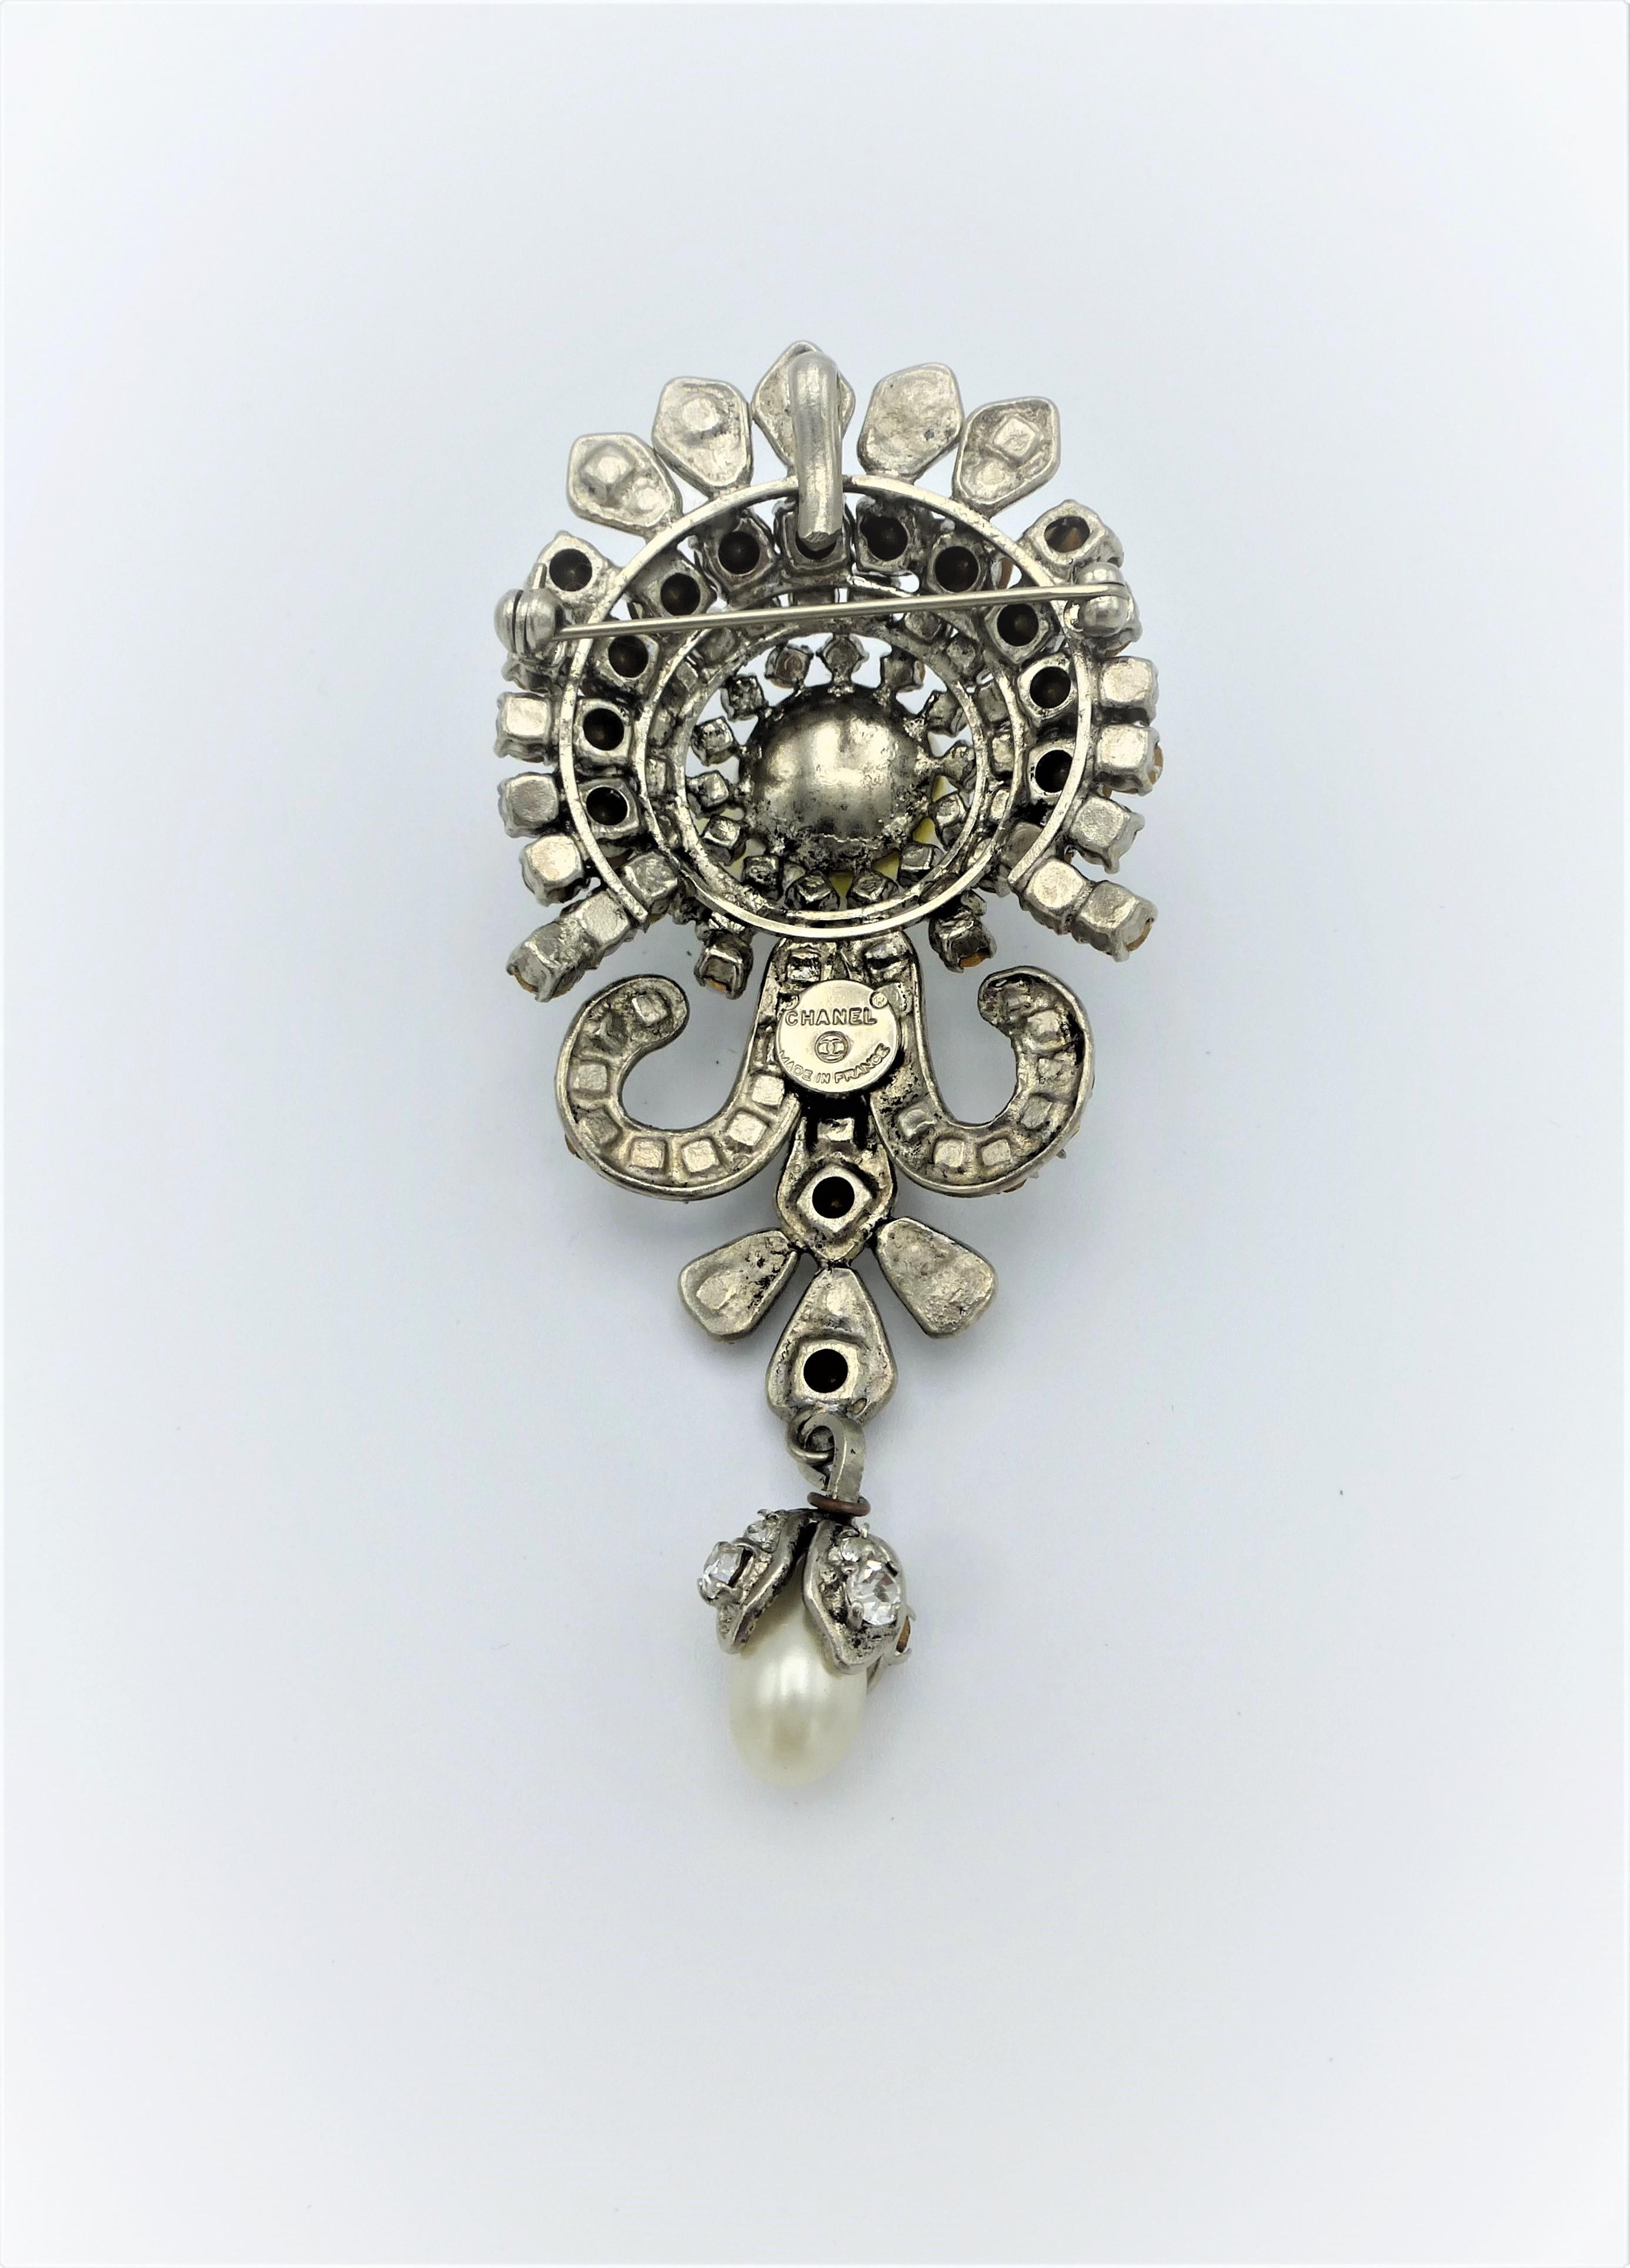 Baroque Revival CHANEL brooch and Pendant, Rhodium plated metal,  Rhinestones, signed 1970/80  For Sale